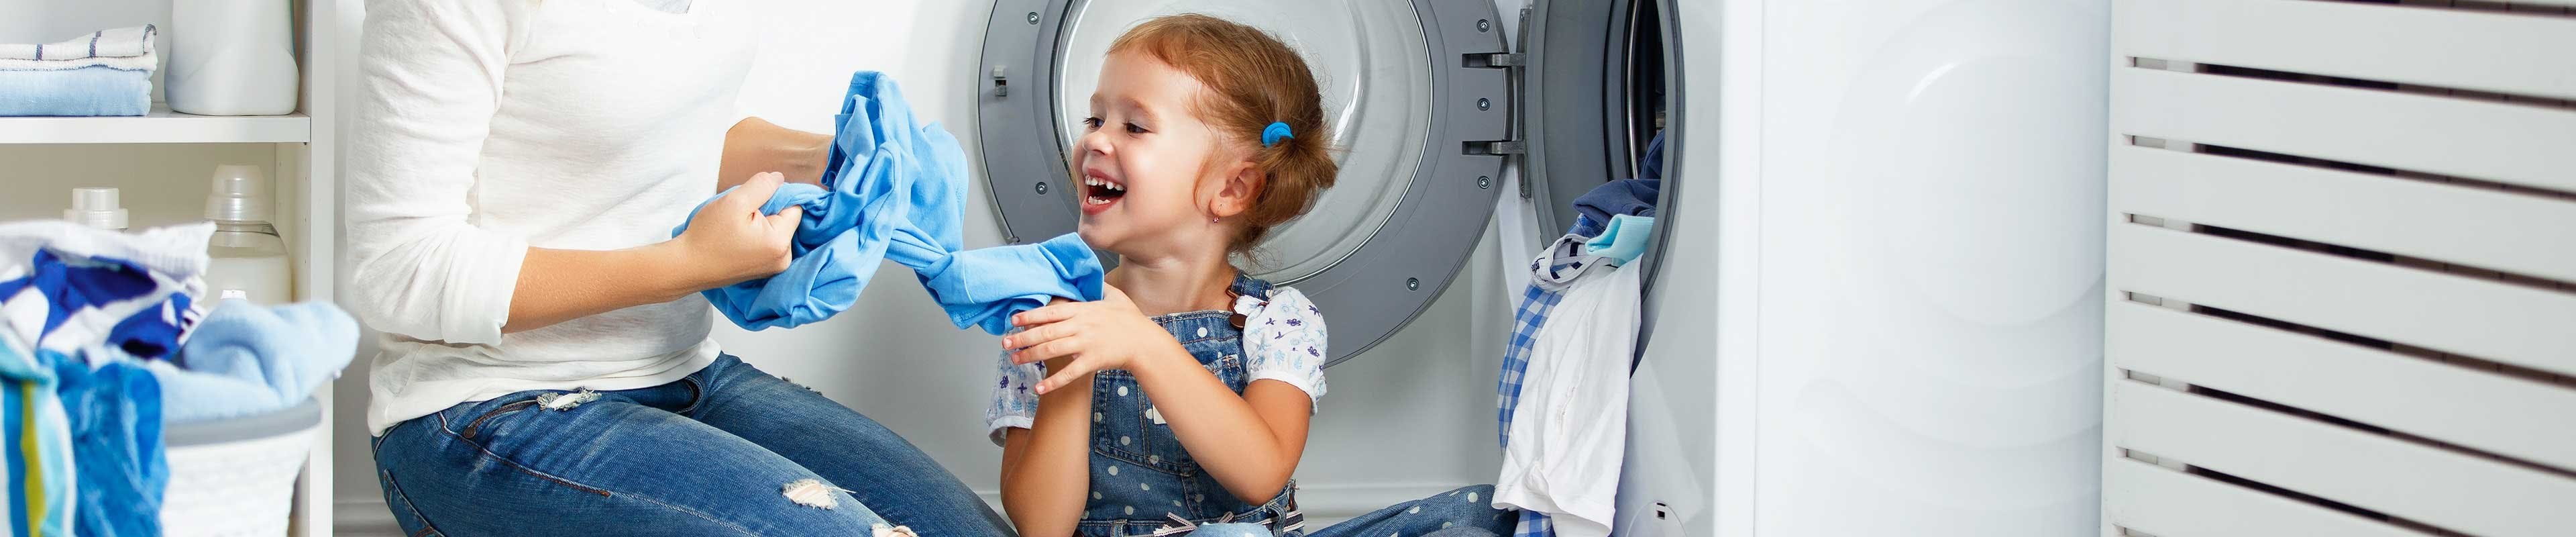 A white mother and her white, red-headed toddler daughter load laundry into a washing machine appliance.